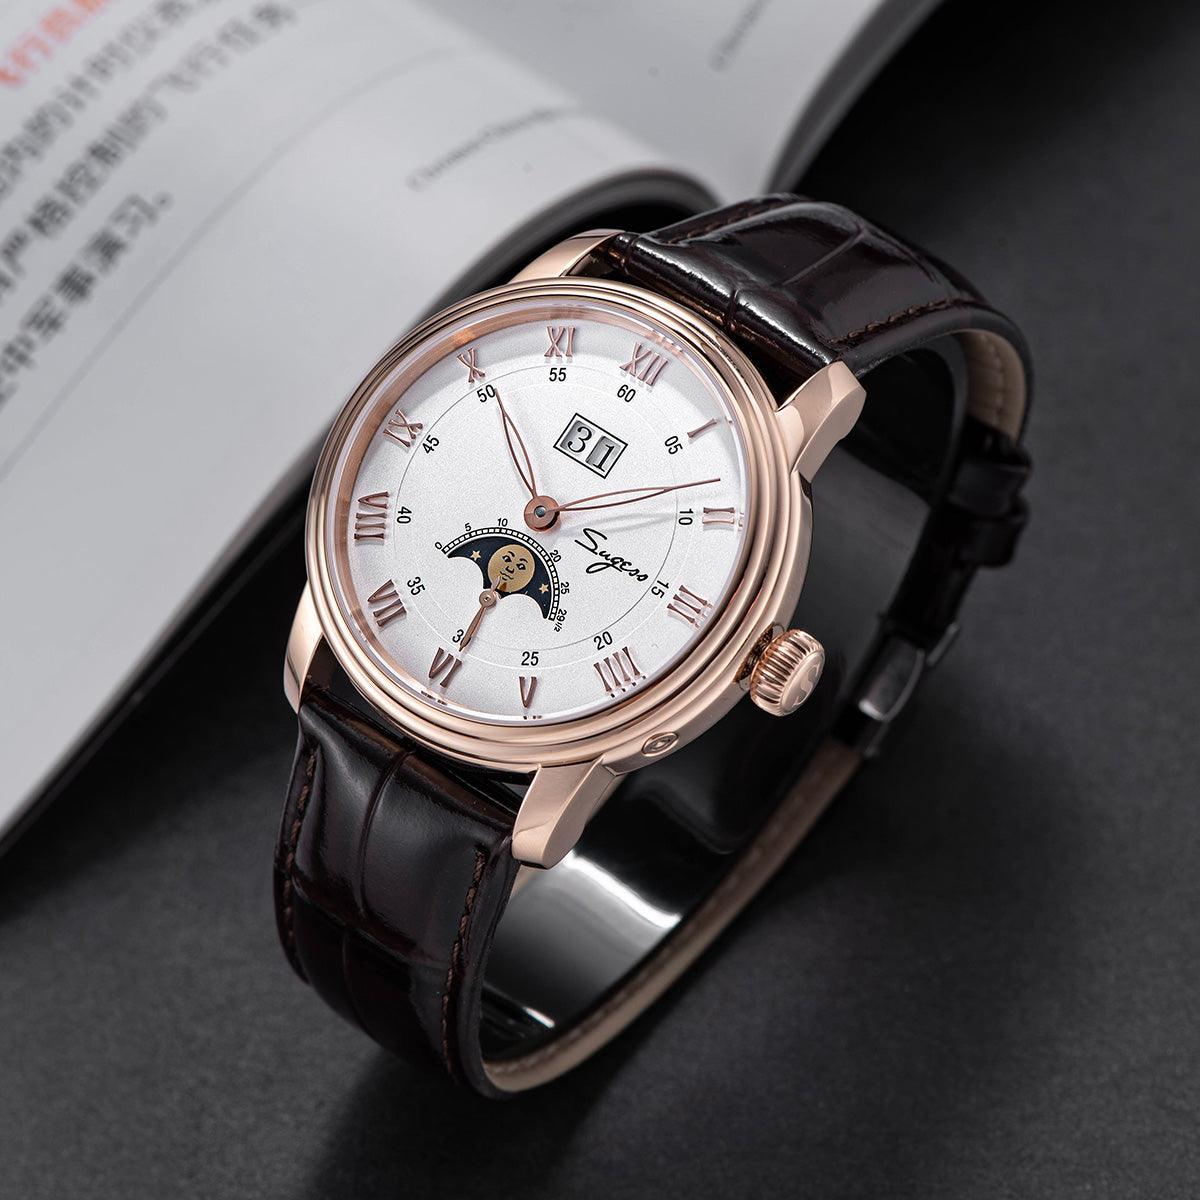 Sugess mechanical men's watch Seagull ST2528 automatic movement smiley face moon phase waterproof personalized customized automatic watch - Murphy Johnson Watches Co.